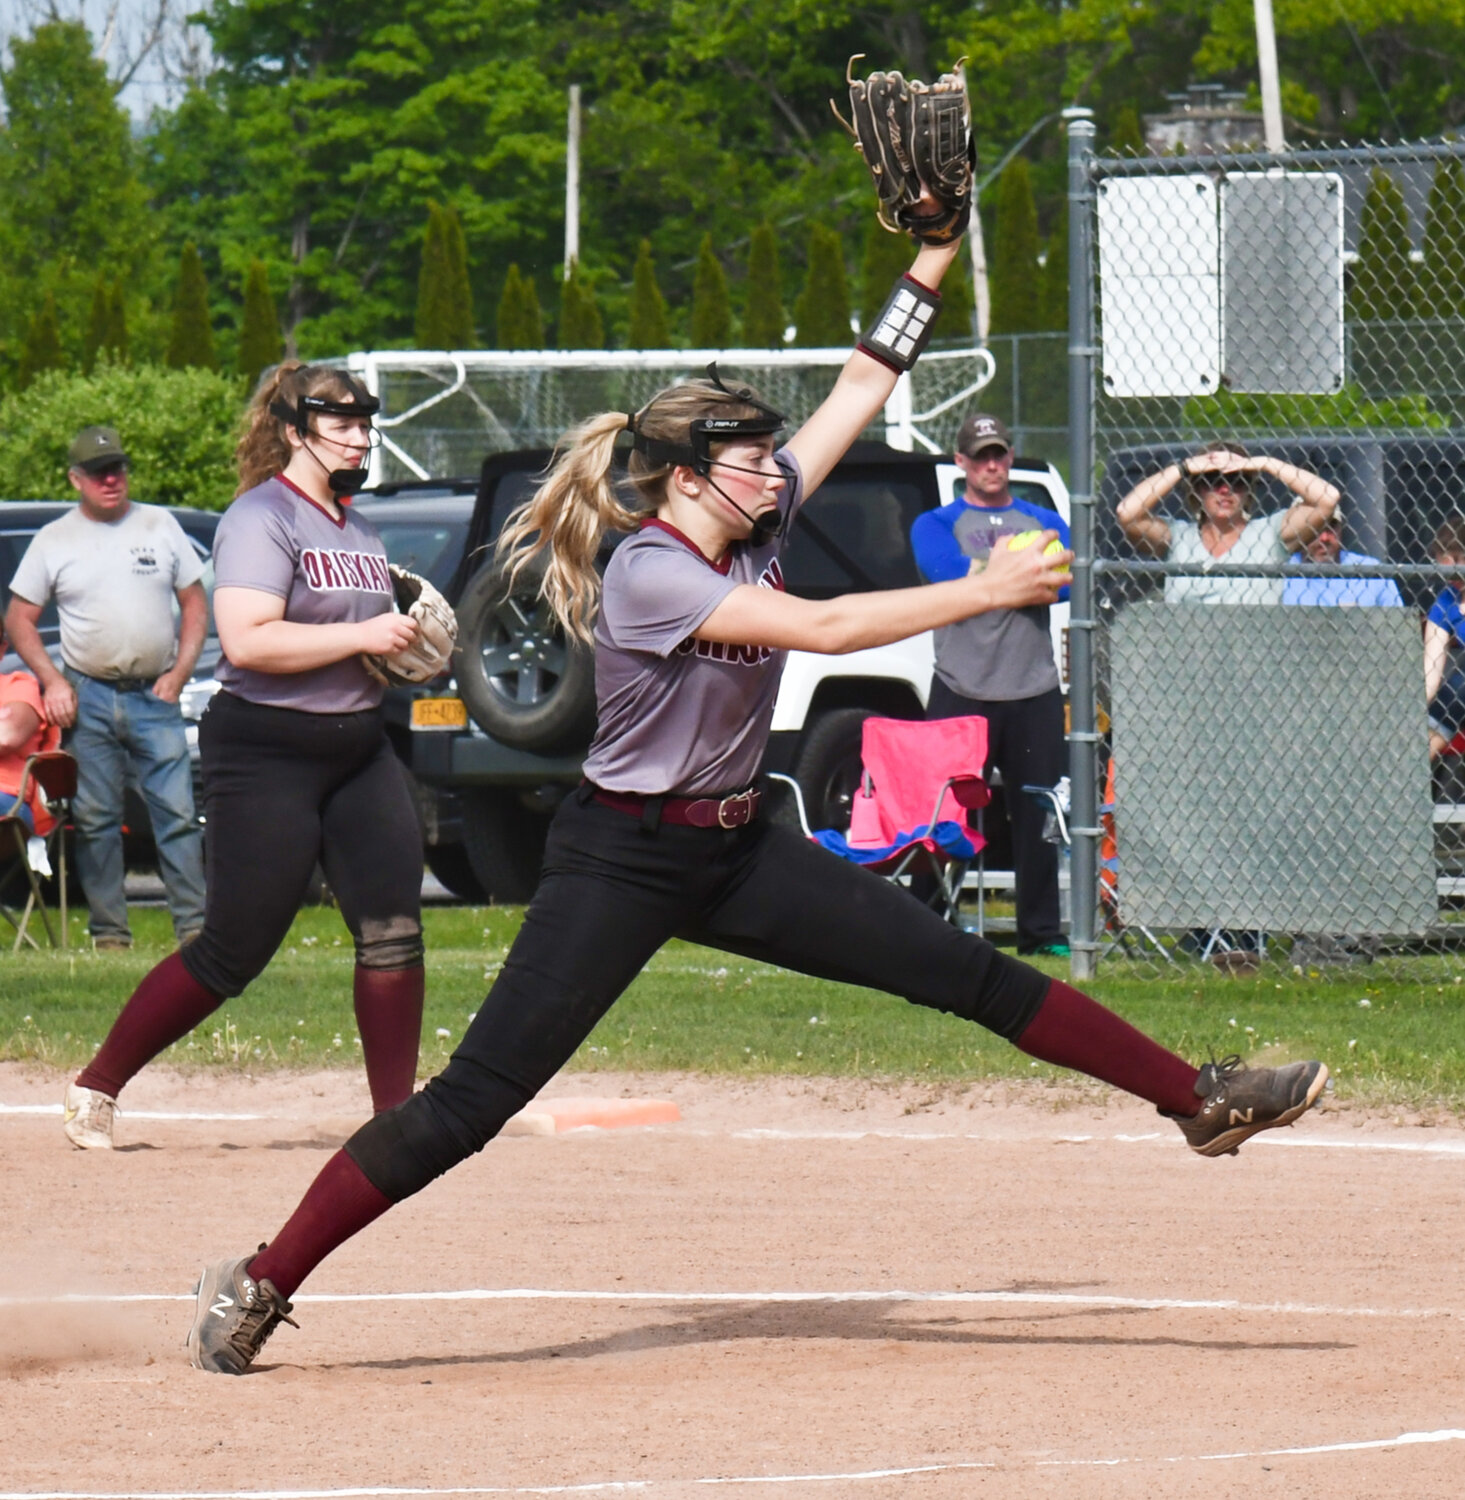 Juliet Tagliaferri pitched a complete game for the win. She struck out 6 while giving up 6 hits and no walks. Oriskany won 3-2. With the victory, Oriskany claimed the Center State Conference Division III title.